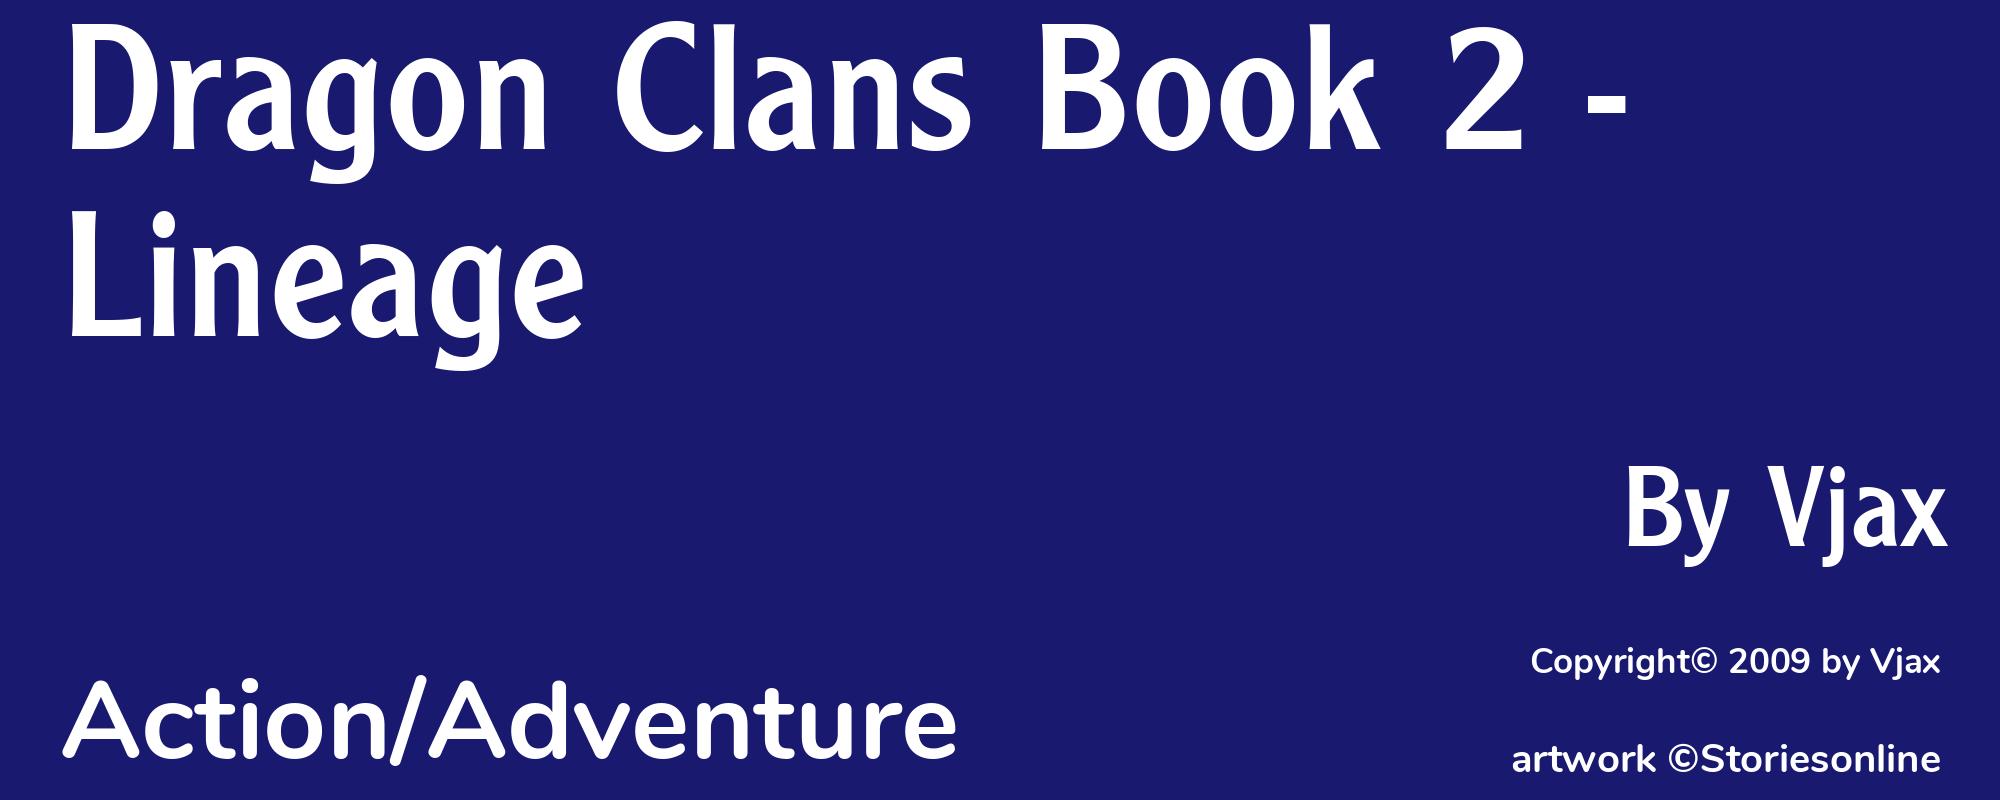 Dragon Clans Book 2 - Lineage - Cover